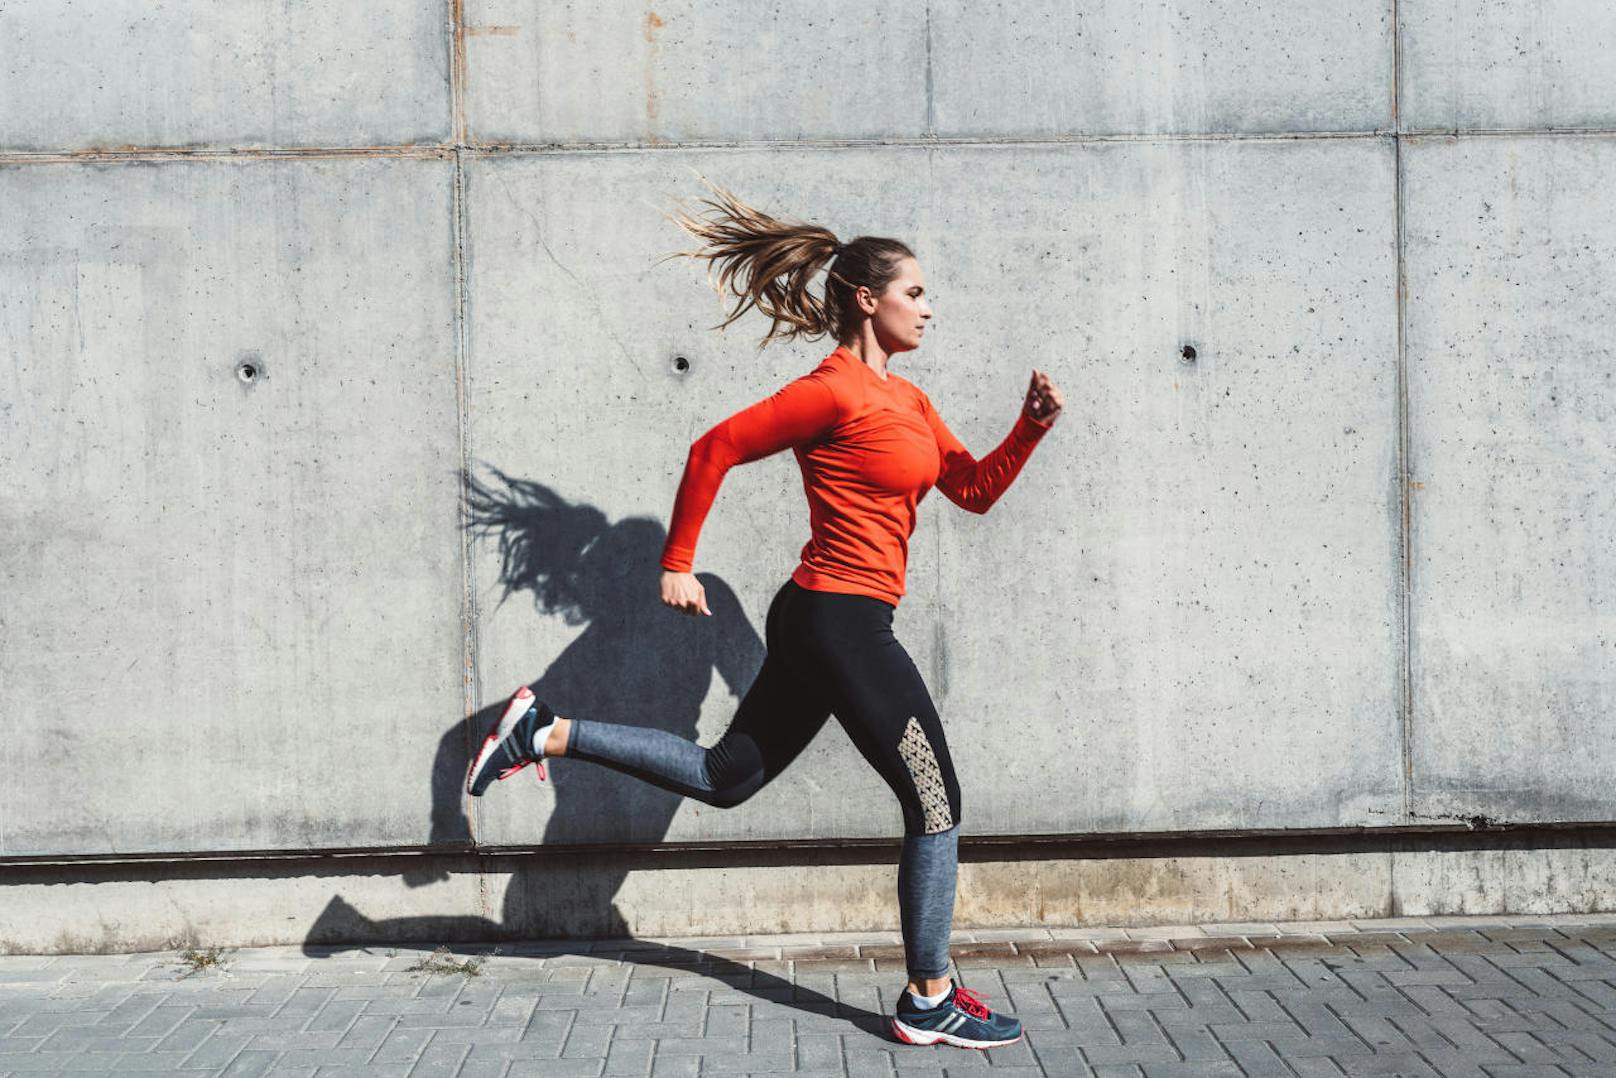 Woman in jogging outfit running outdoors.